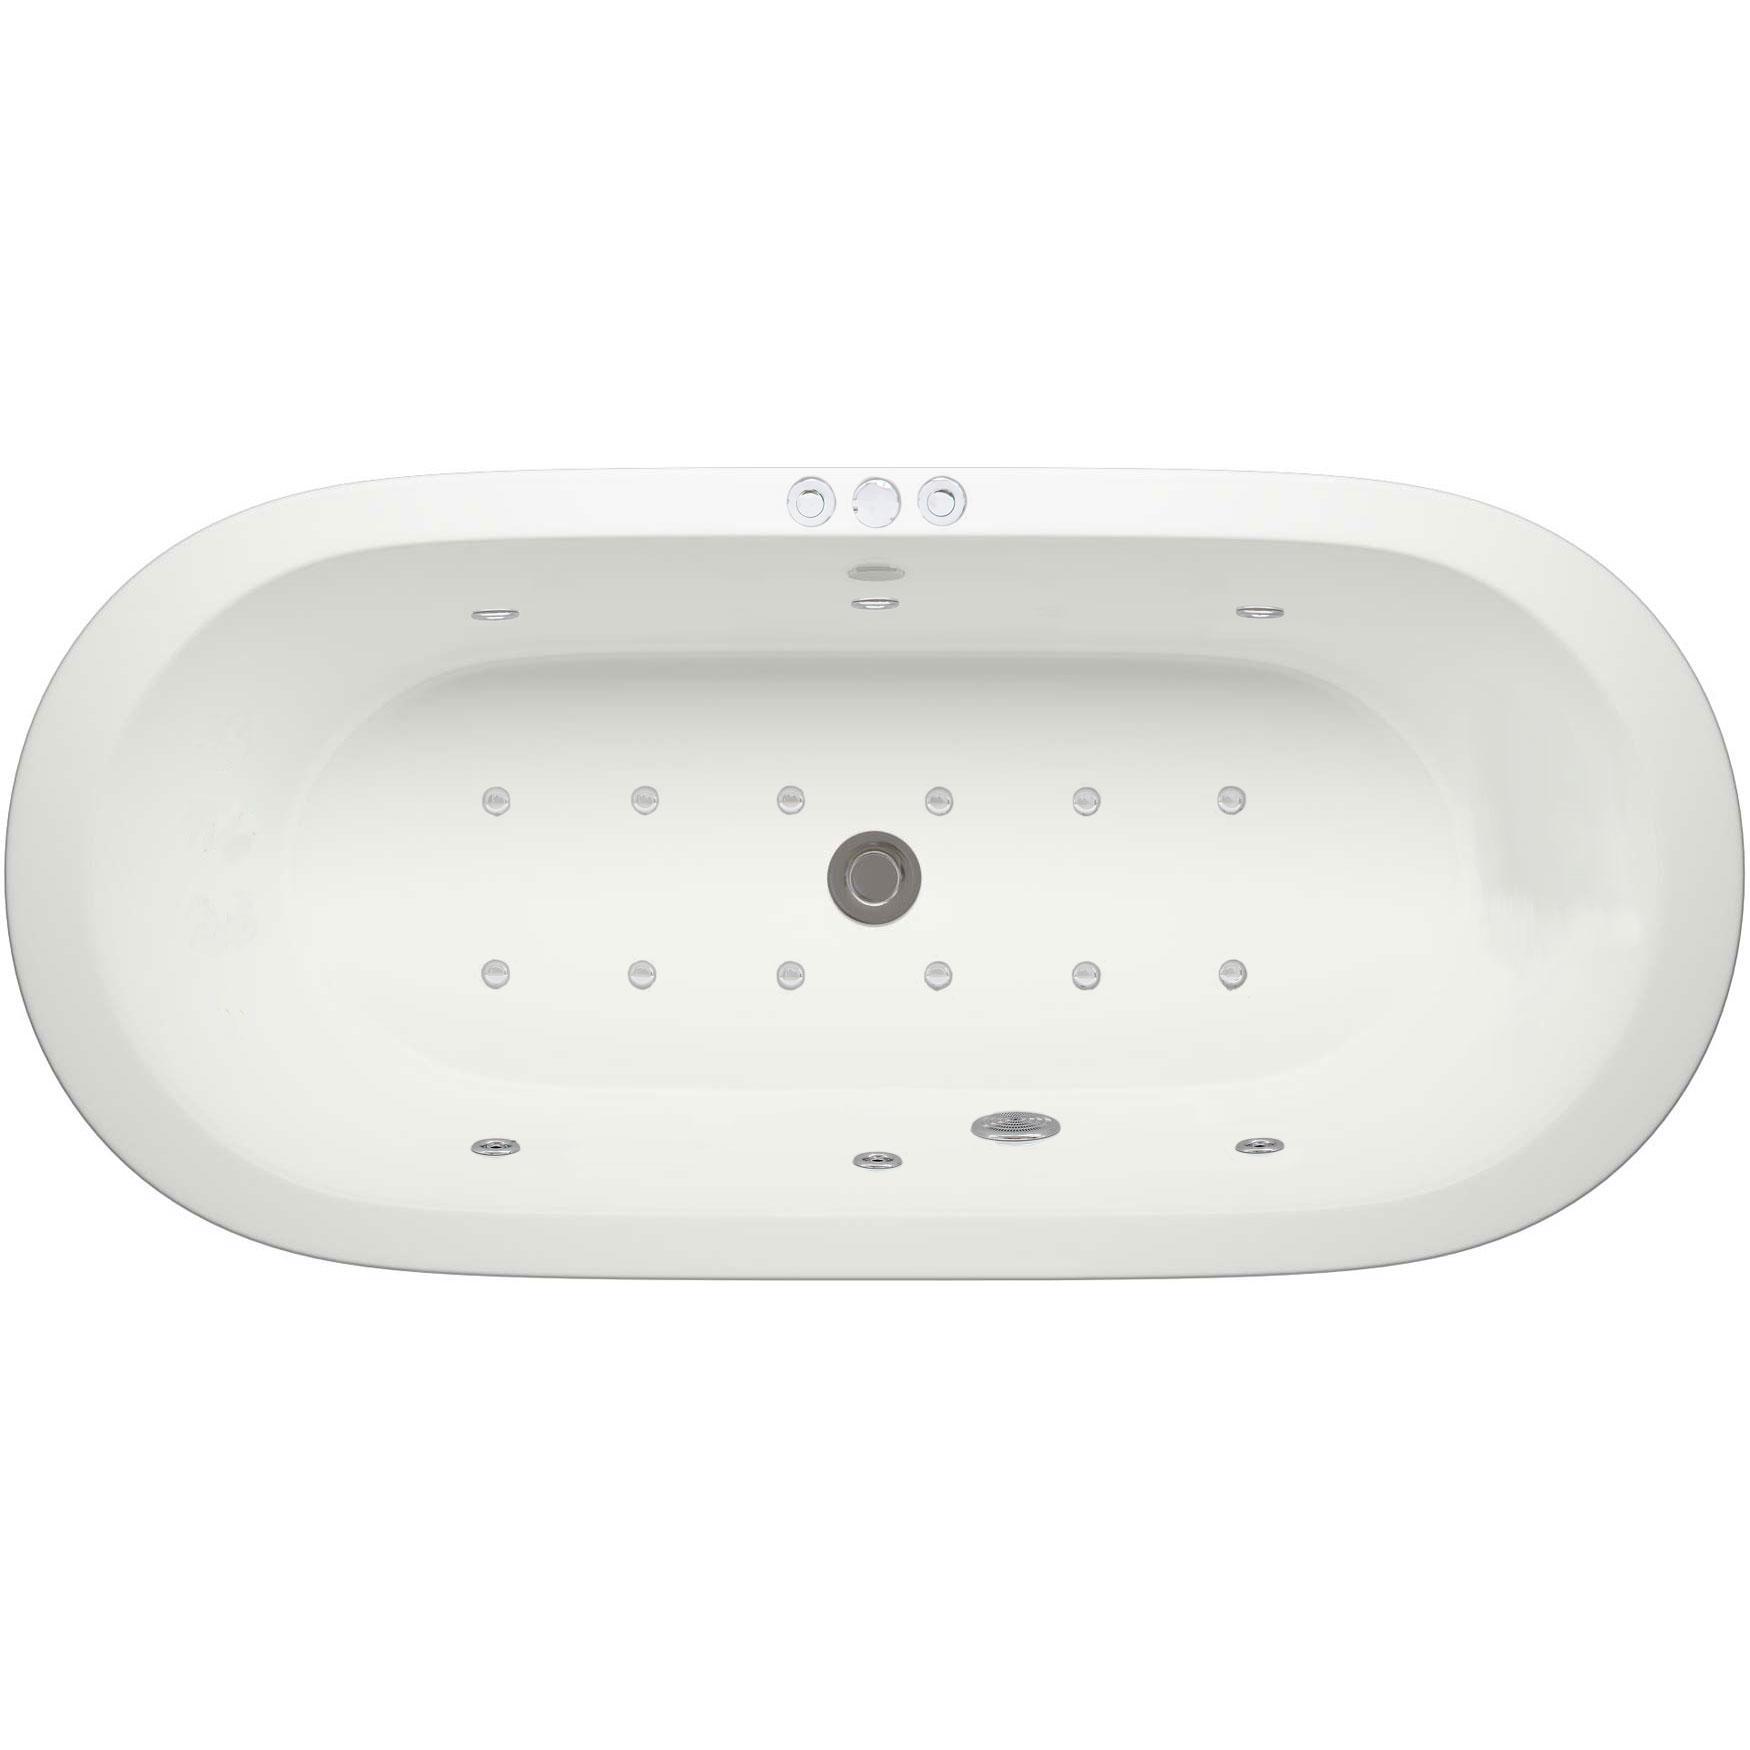 An image of Lisna Waters Curve 18 Jet Whirlpool Airspa Freestanding Bath - 1500Mm X 800Mm